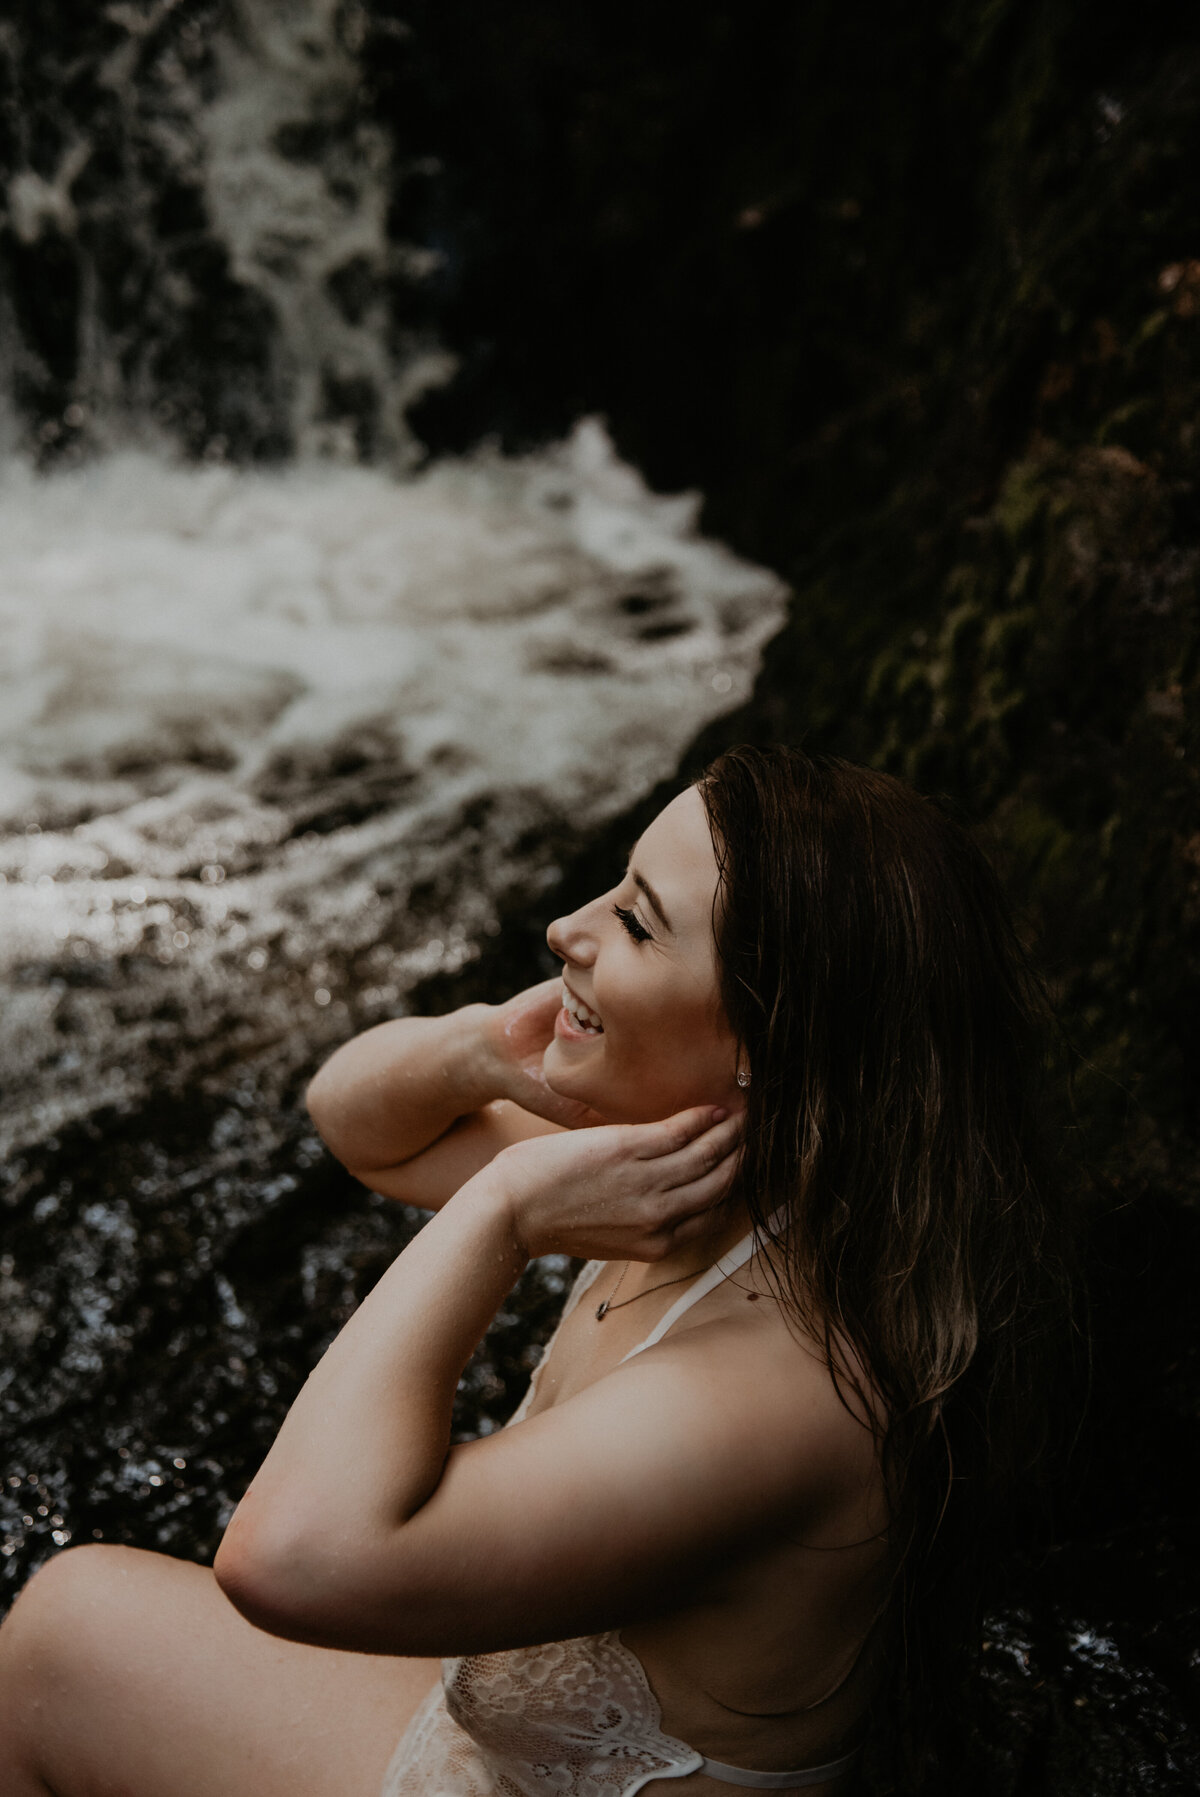 side view of a girl sitting on a boulder beside a waterfall. She has her hands up around her jawline and she is laughing. She is wearing a white body suit and has wet hair from being in the small waterfall catch.